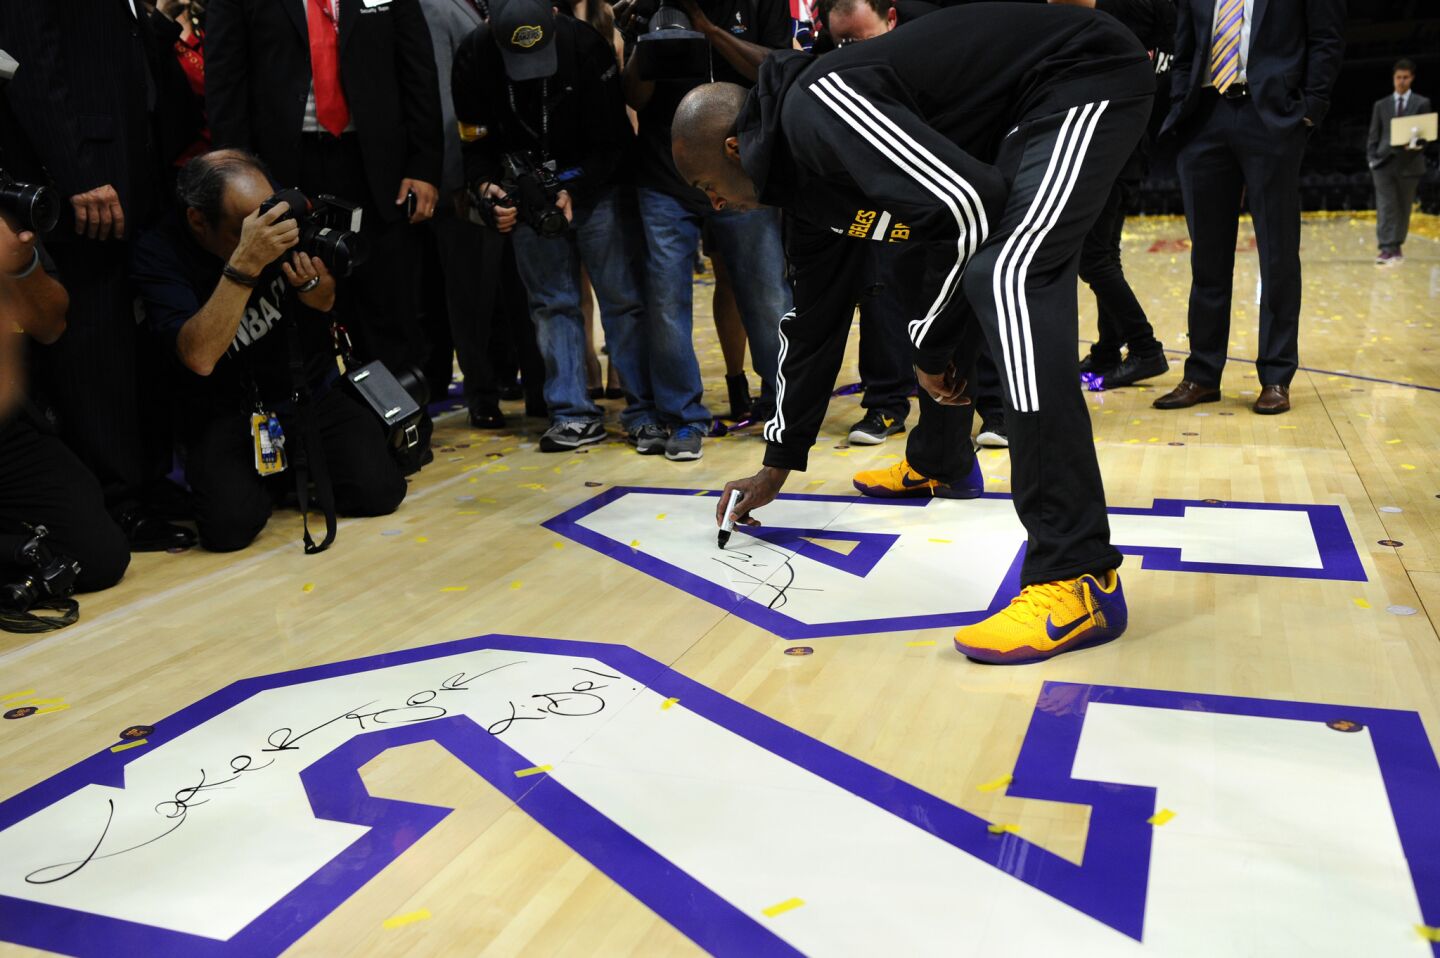 Kobe Bryant signs the court late into the night at the Staples Center.